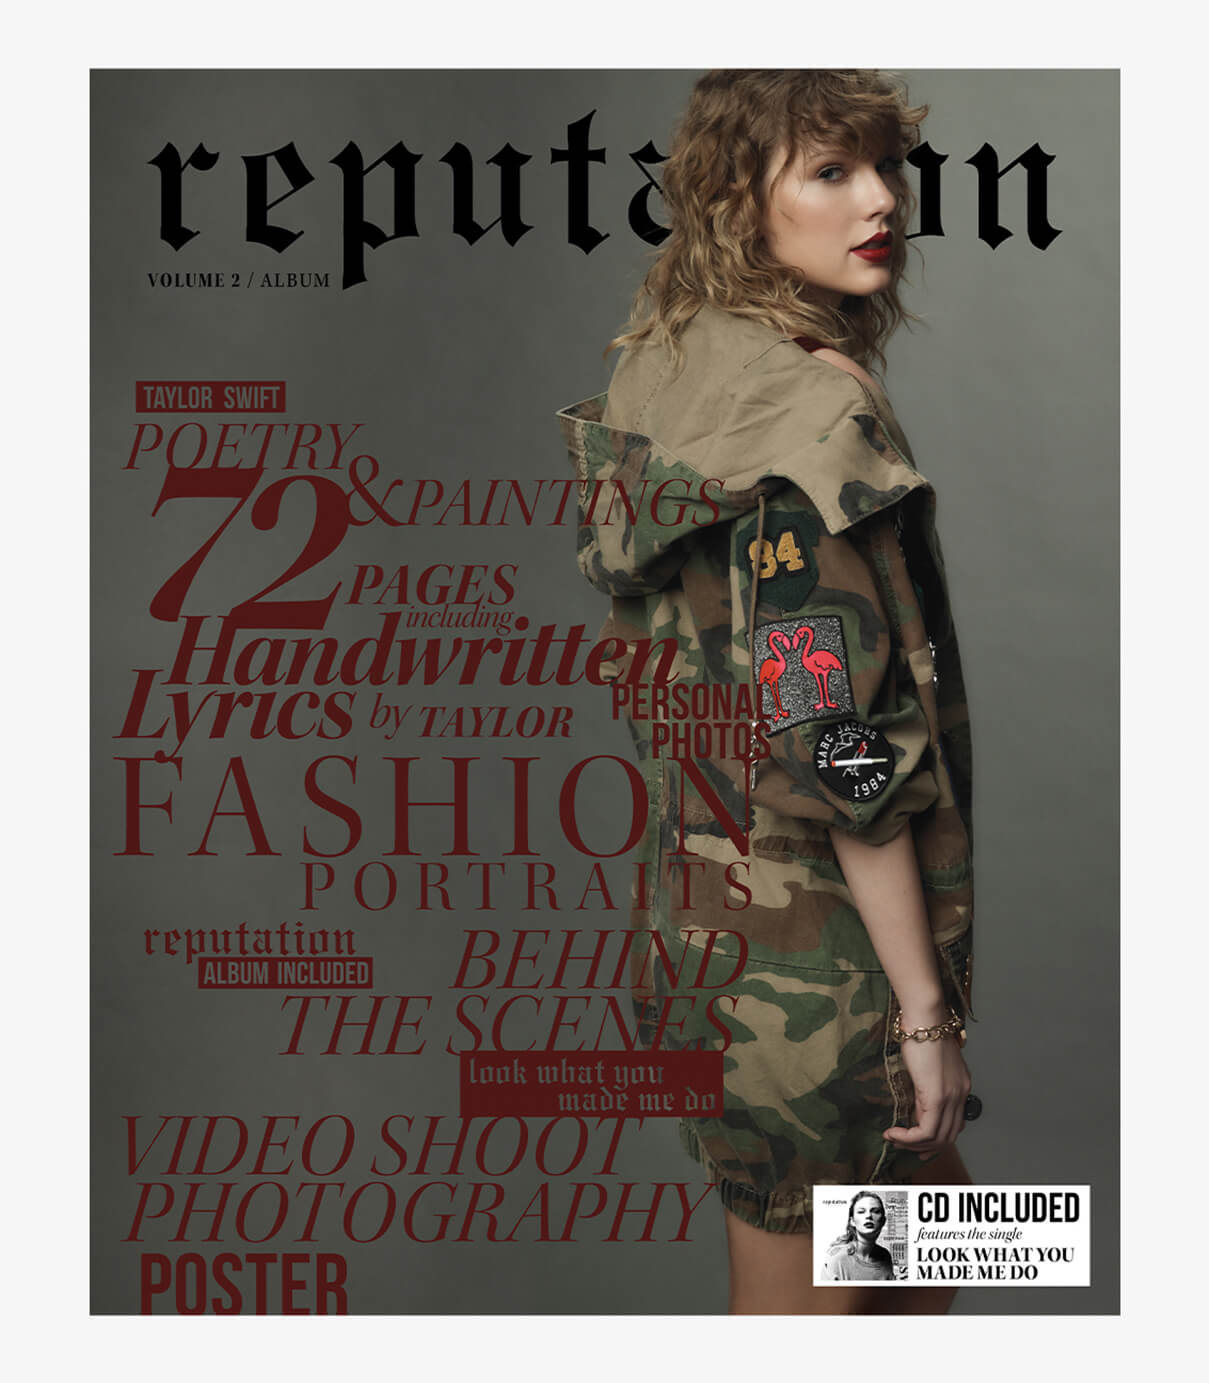 cover design of reputation vol 2 by Taylor Swift deluxe packaging